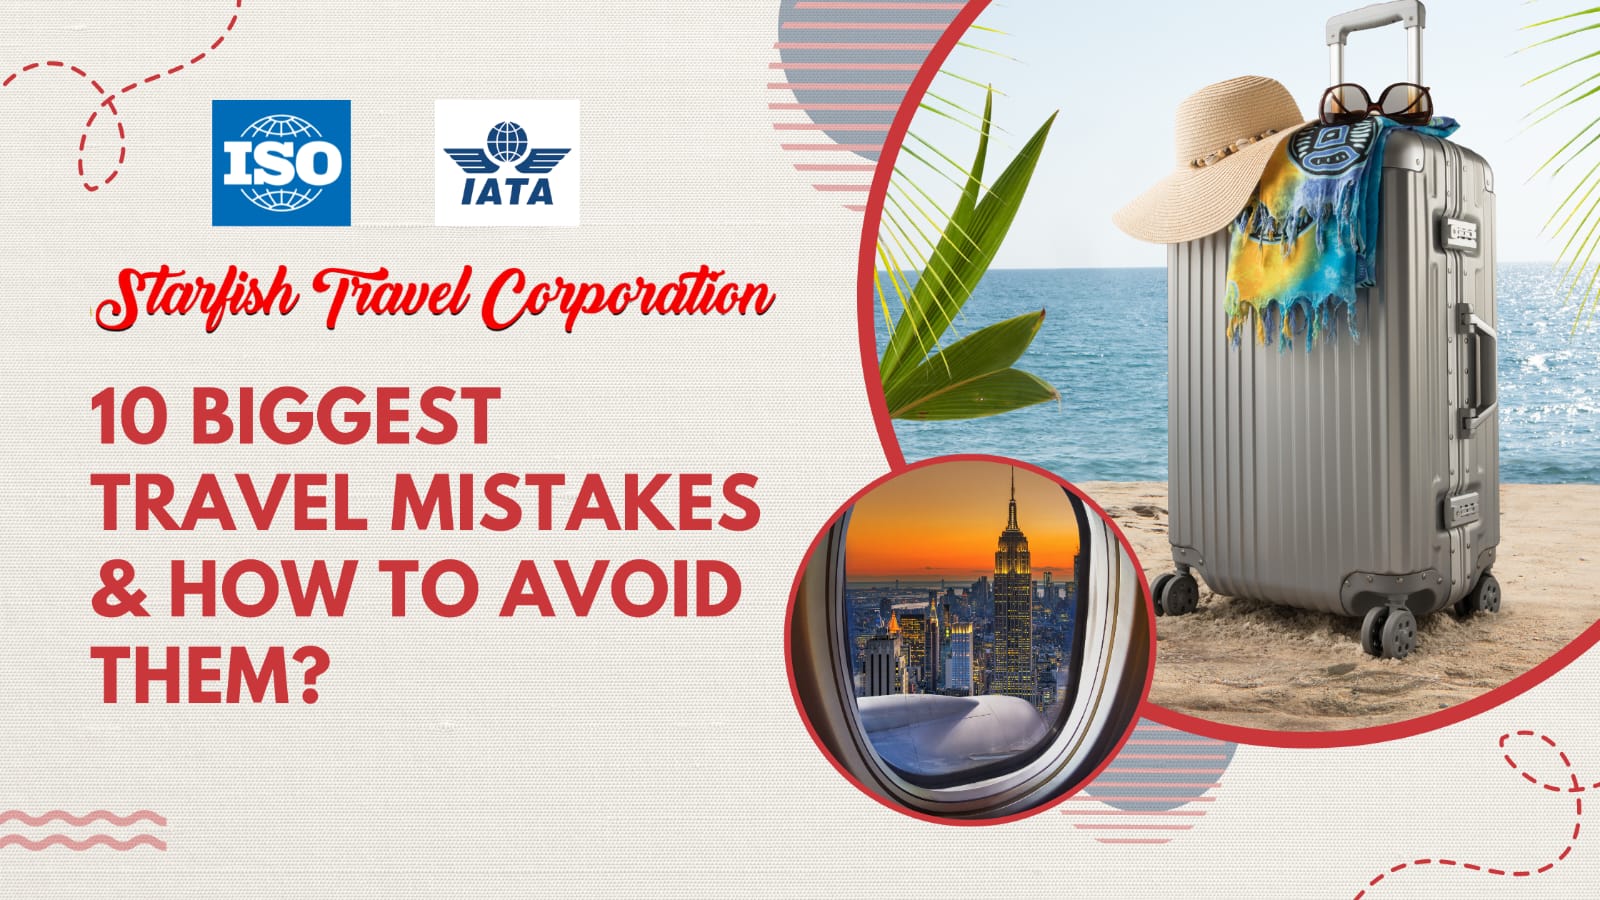 10 Biggest Travel Mistakes & How To Avoid Them